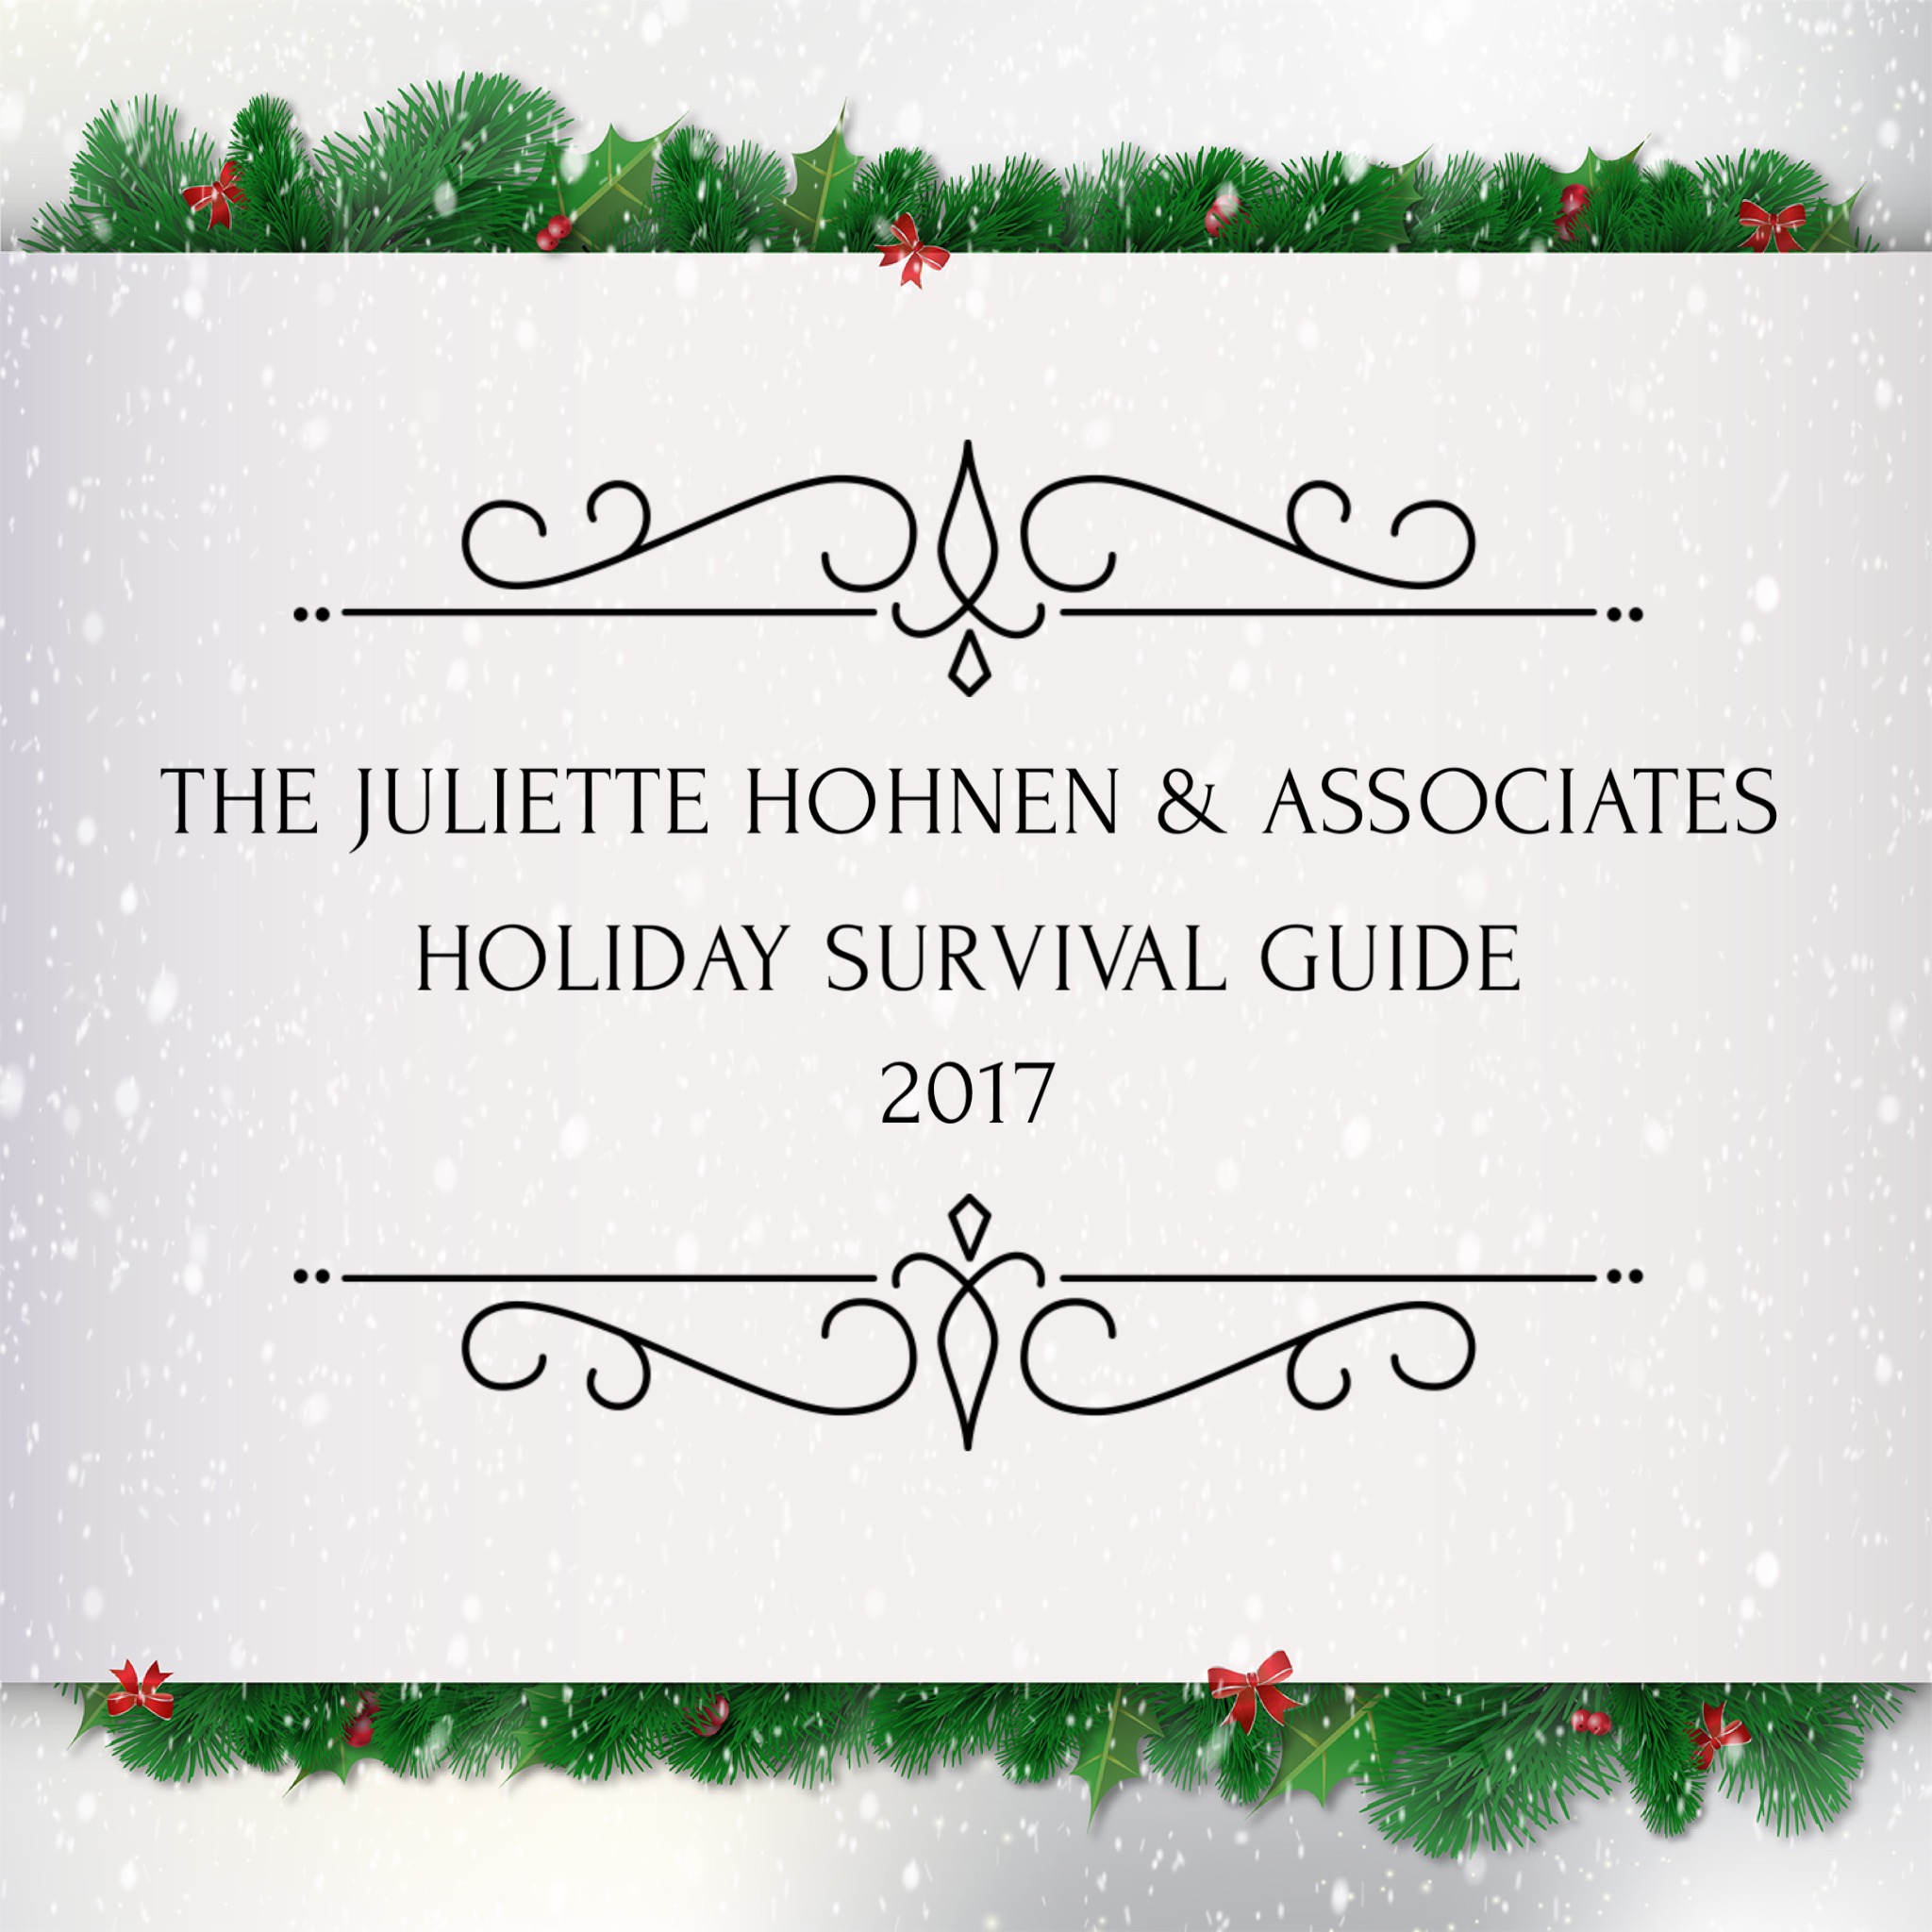 The 2017 Holiday Survival Guide